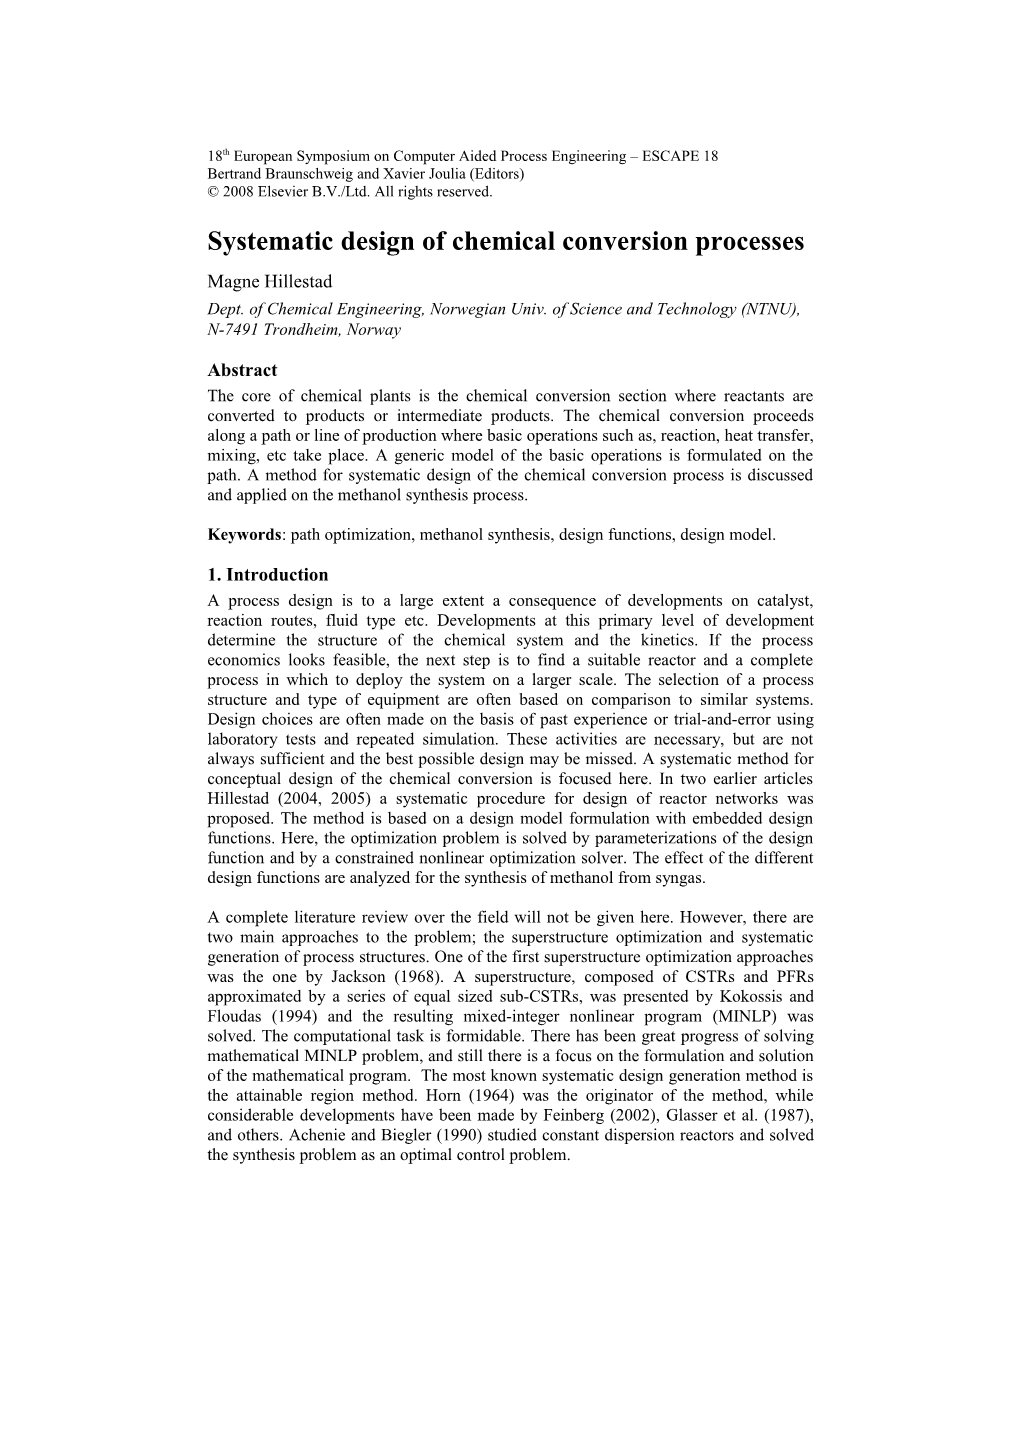 Systematic Design of Chemical Conversion Processes